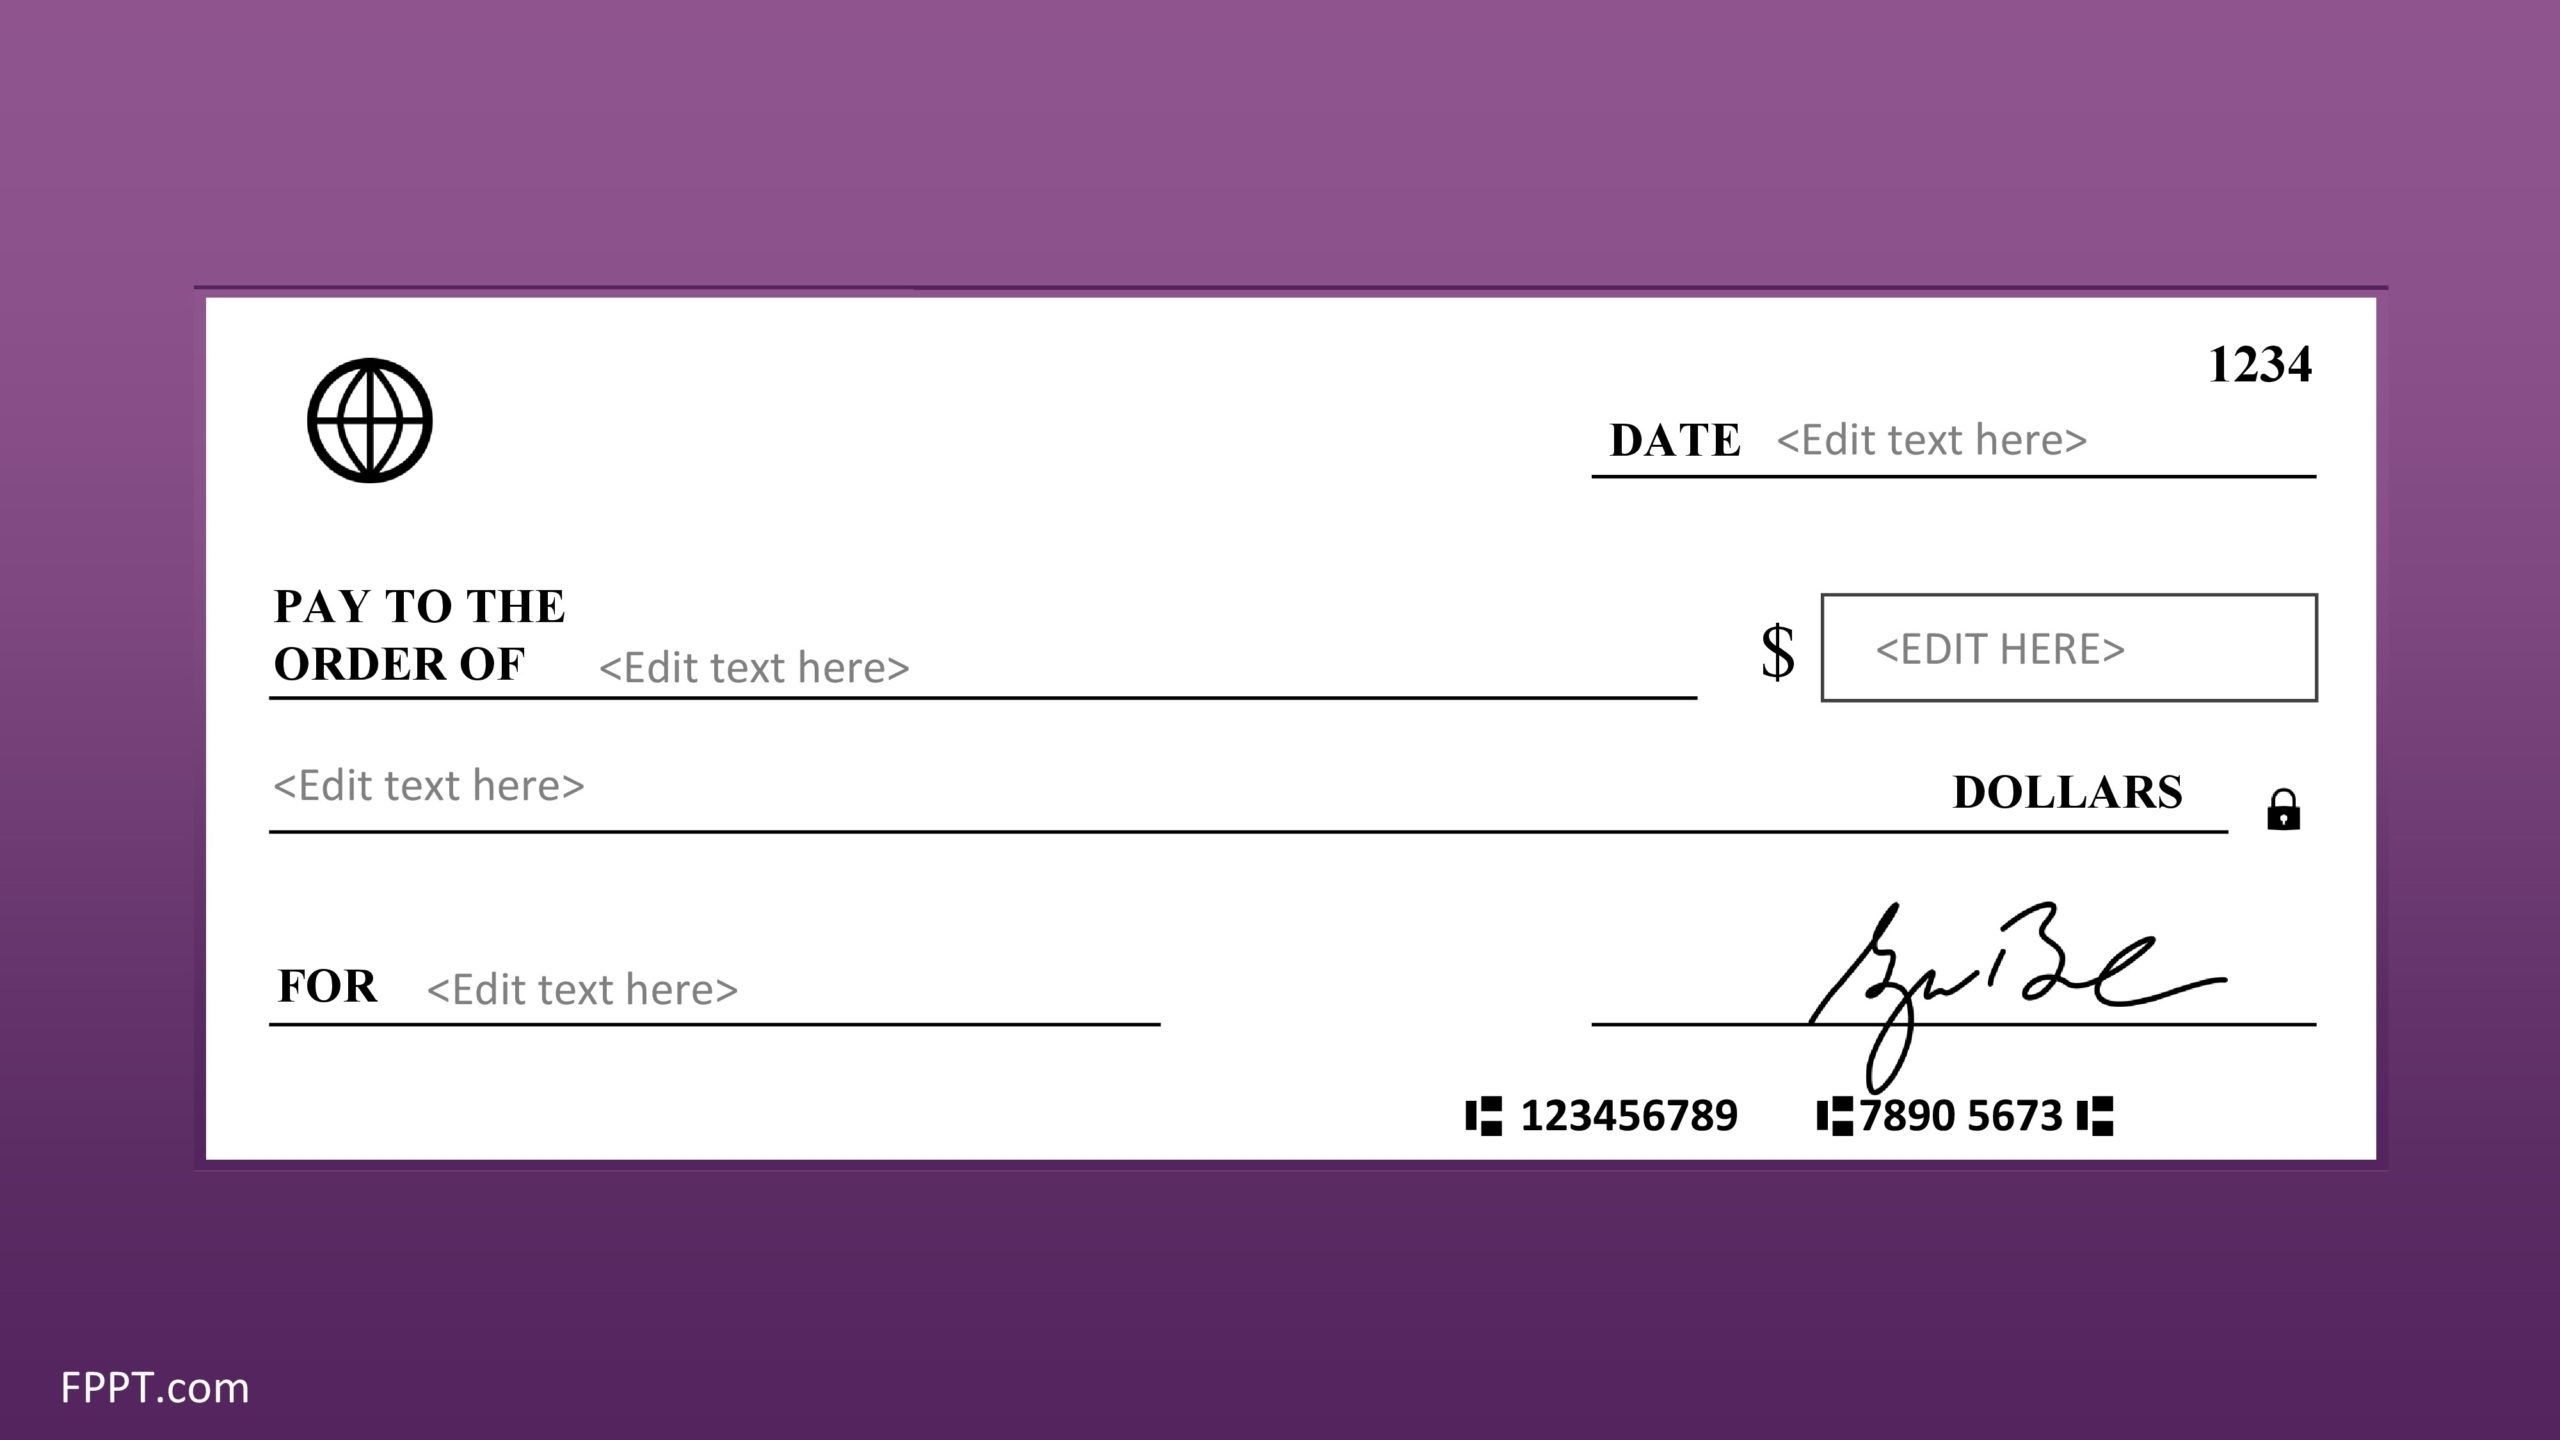 23 Blank Check Templates (Real & Fake) ᐅ Templatelab For Large Blank Cheque Template